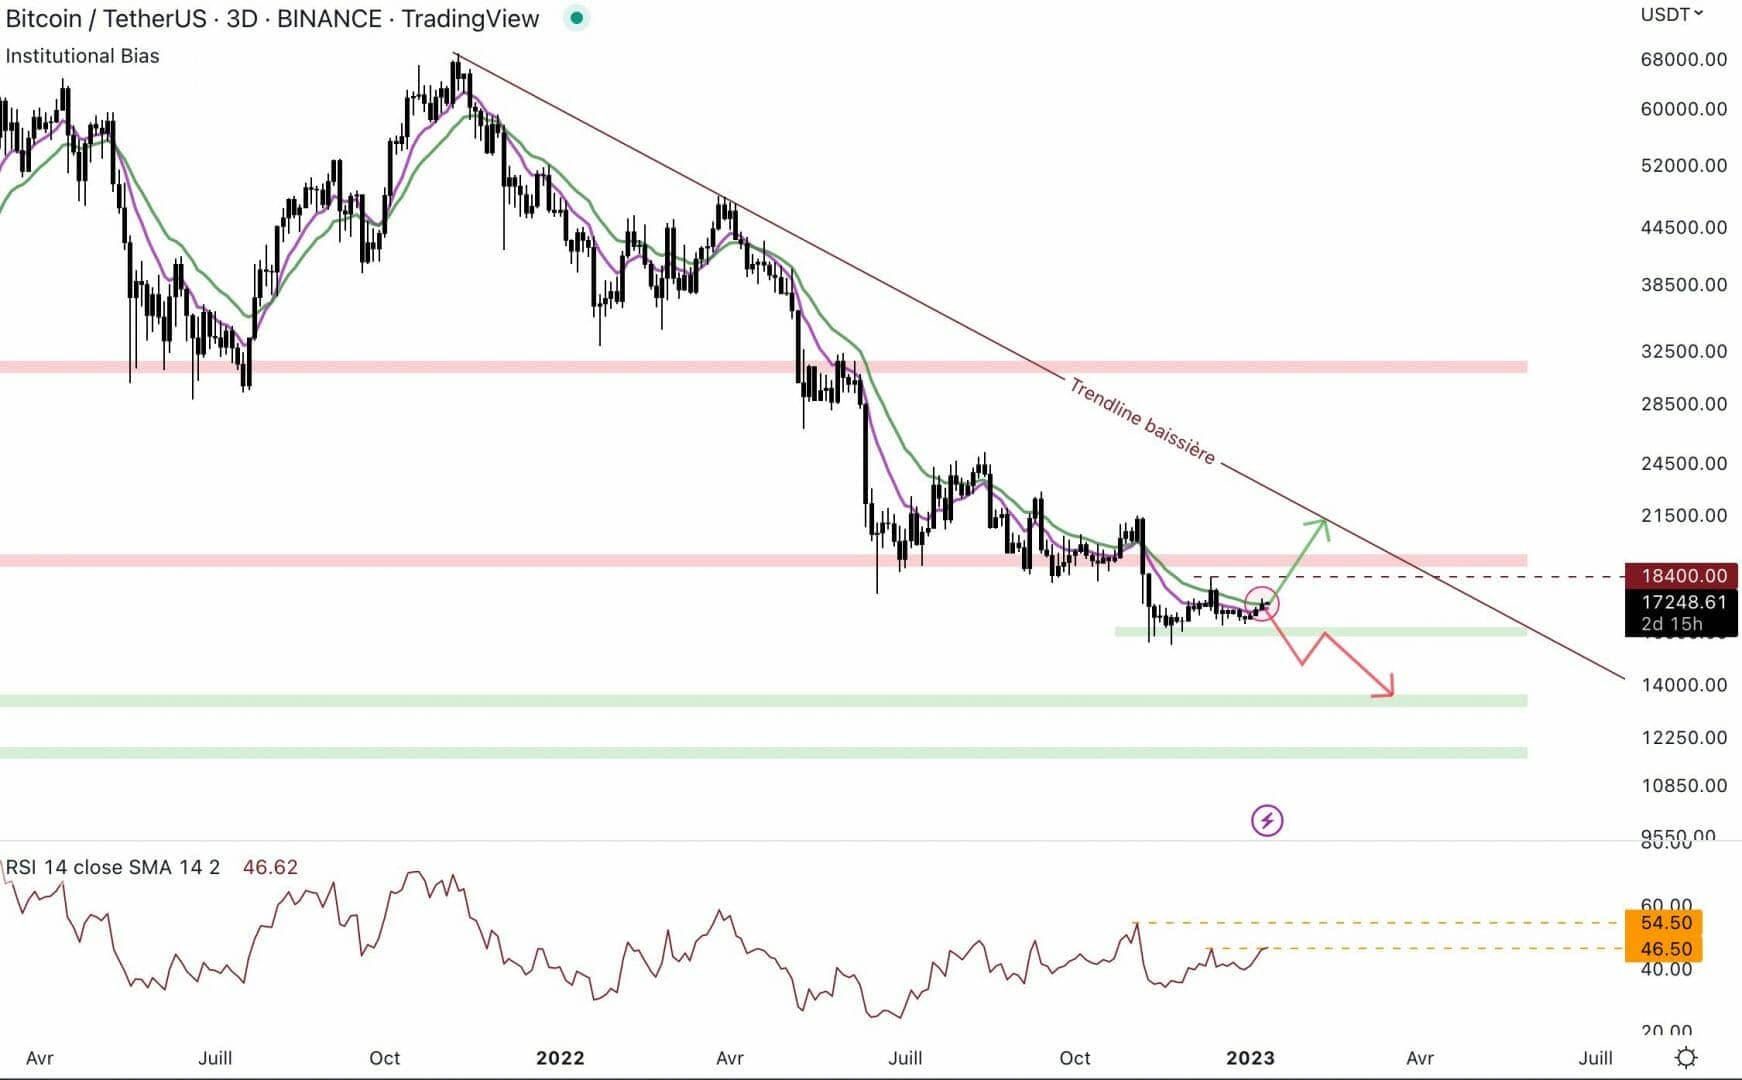 Bitcoin needs to change momentum to avoid another downward wave.